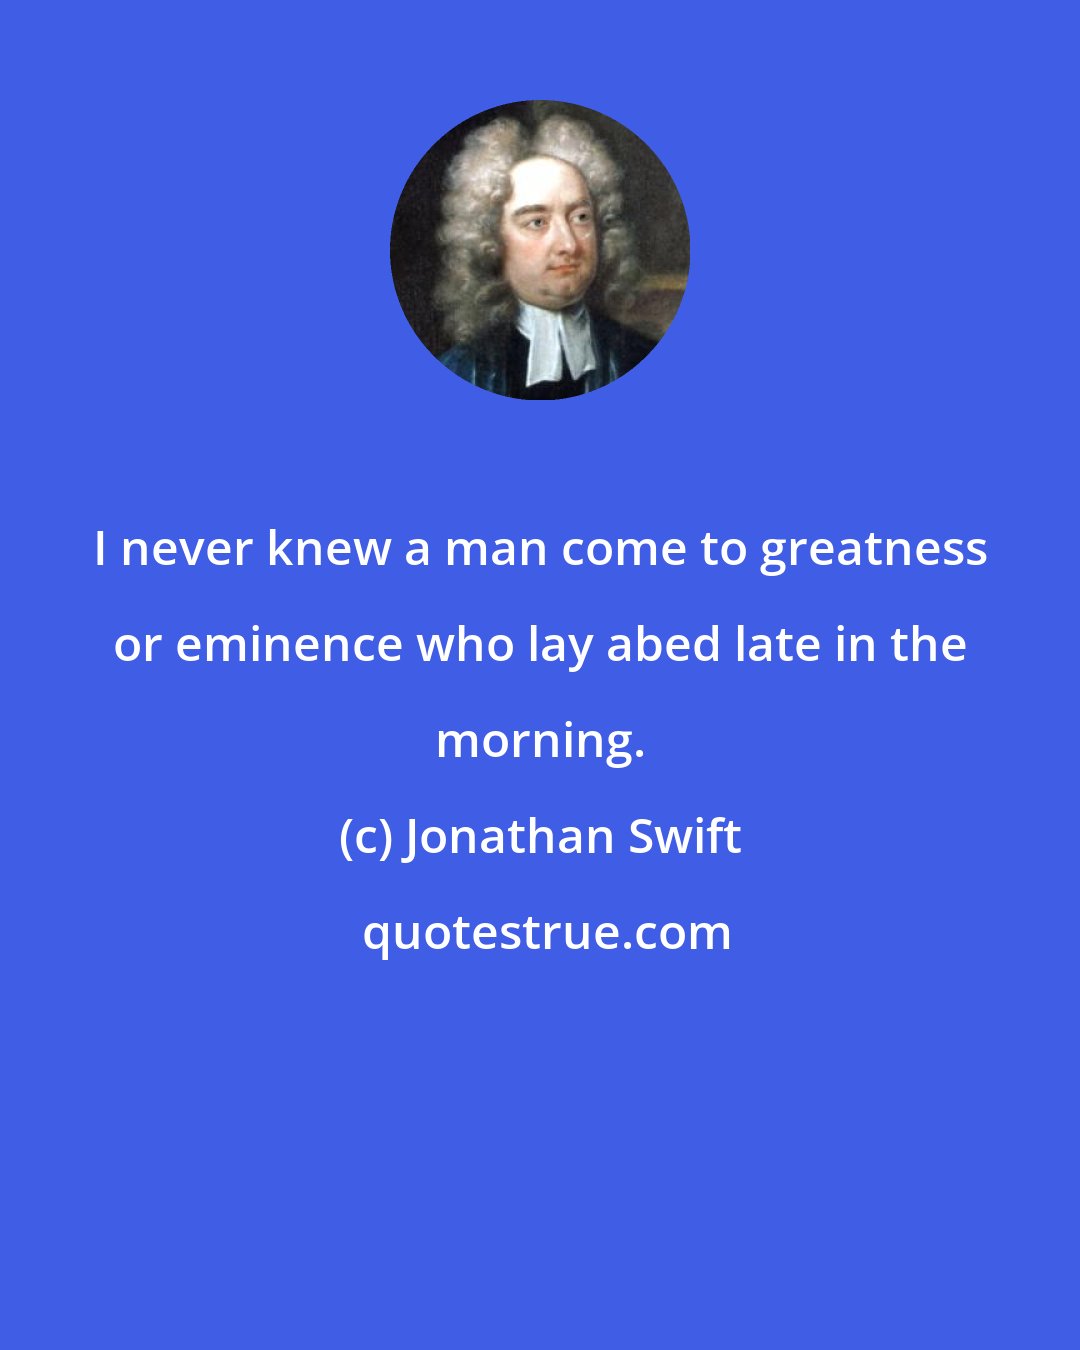 Jonathan Swift: I never knew a man come to greatness or eminence who lay abed late in the morning.